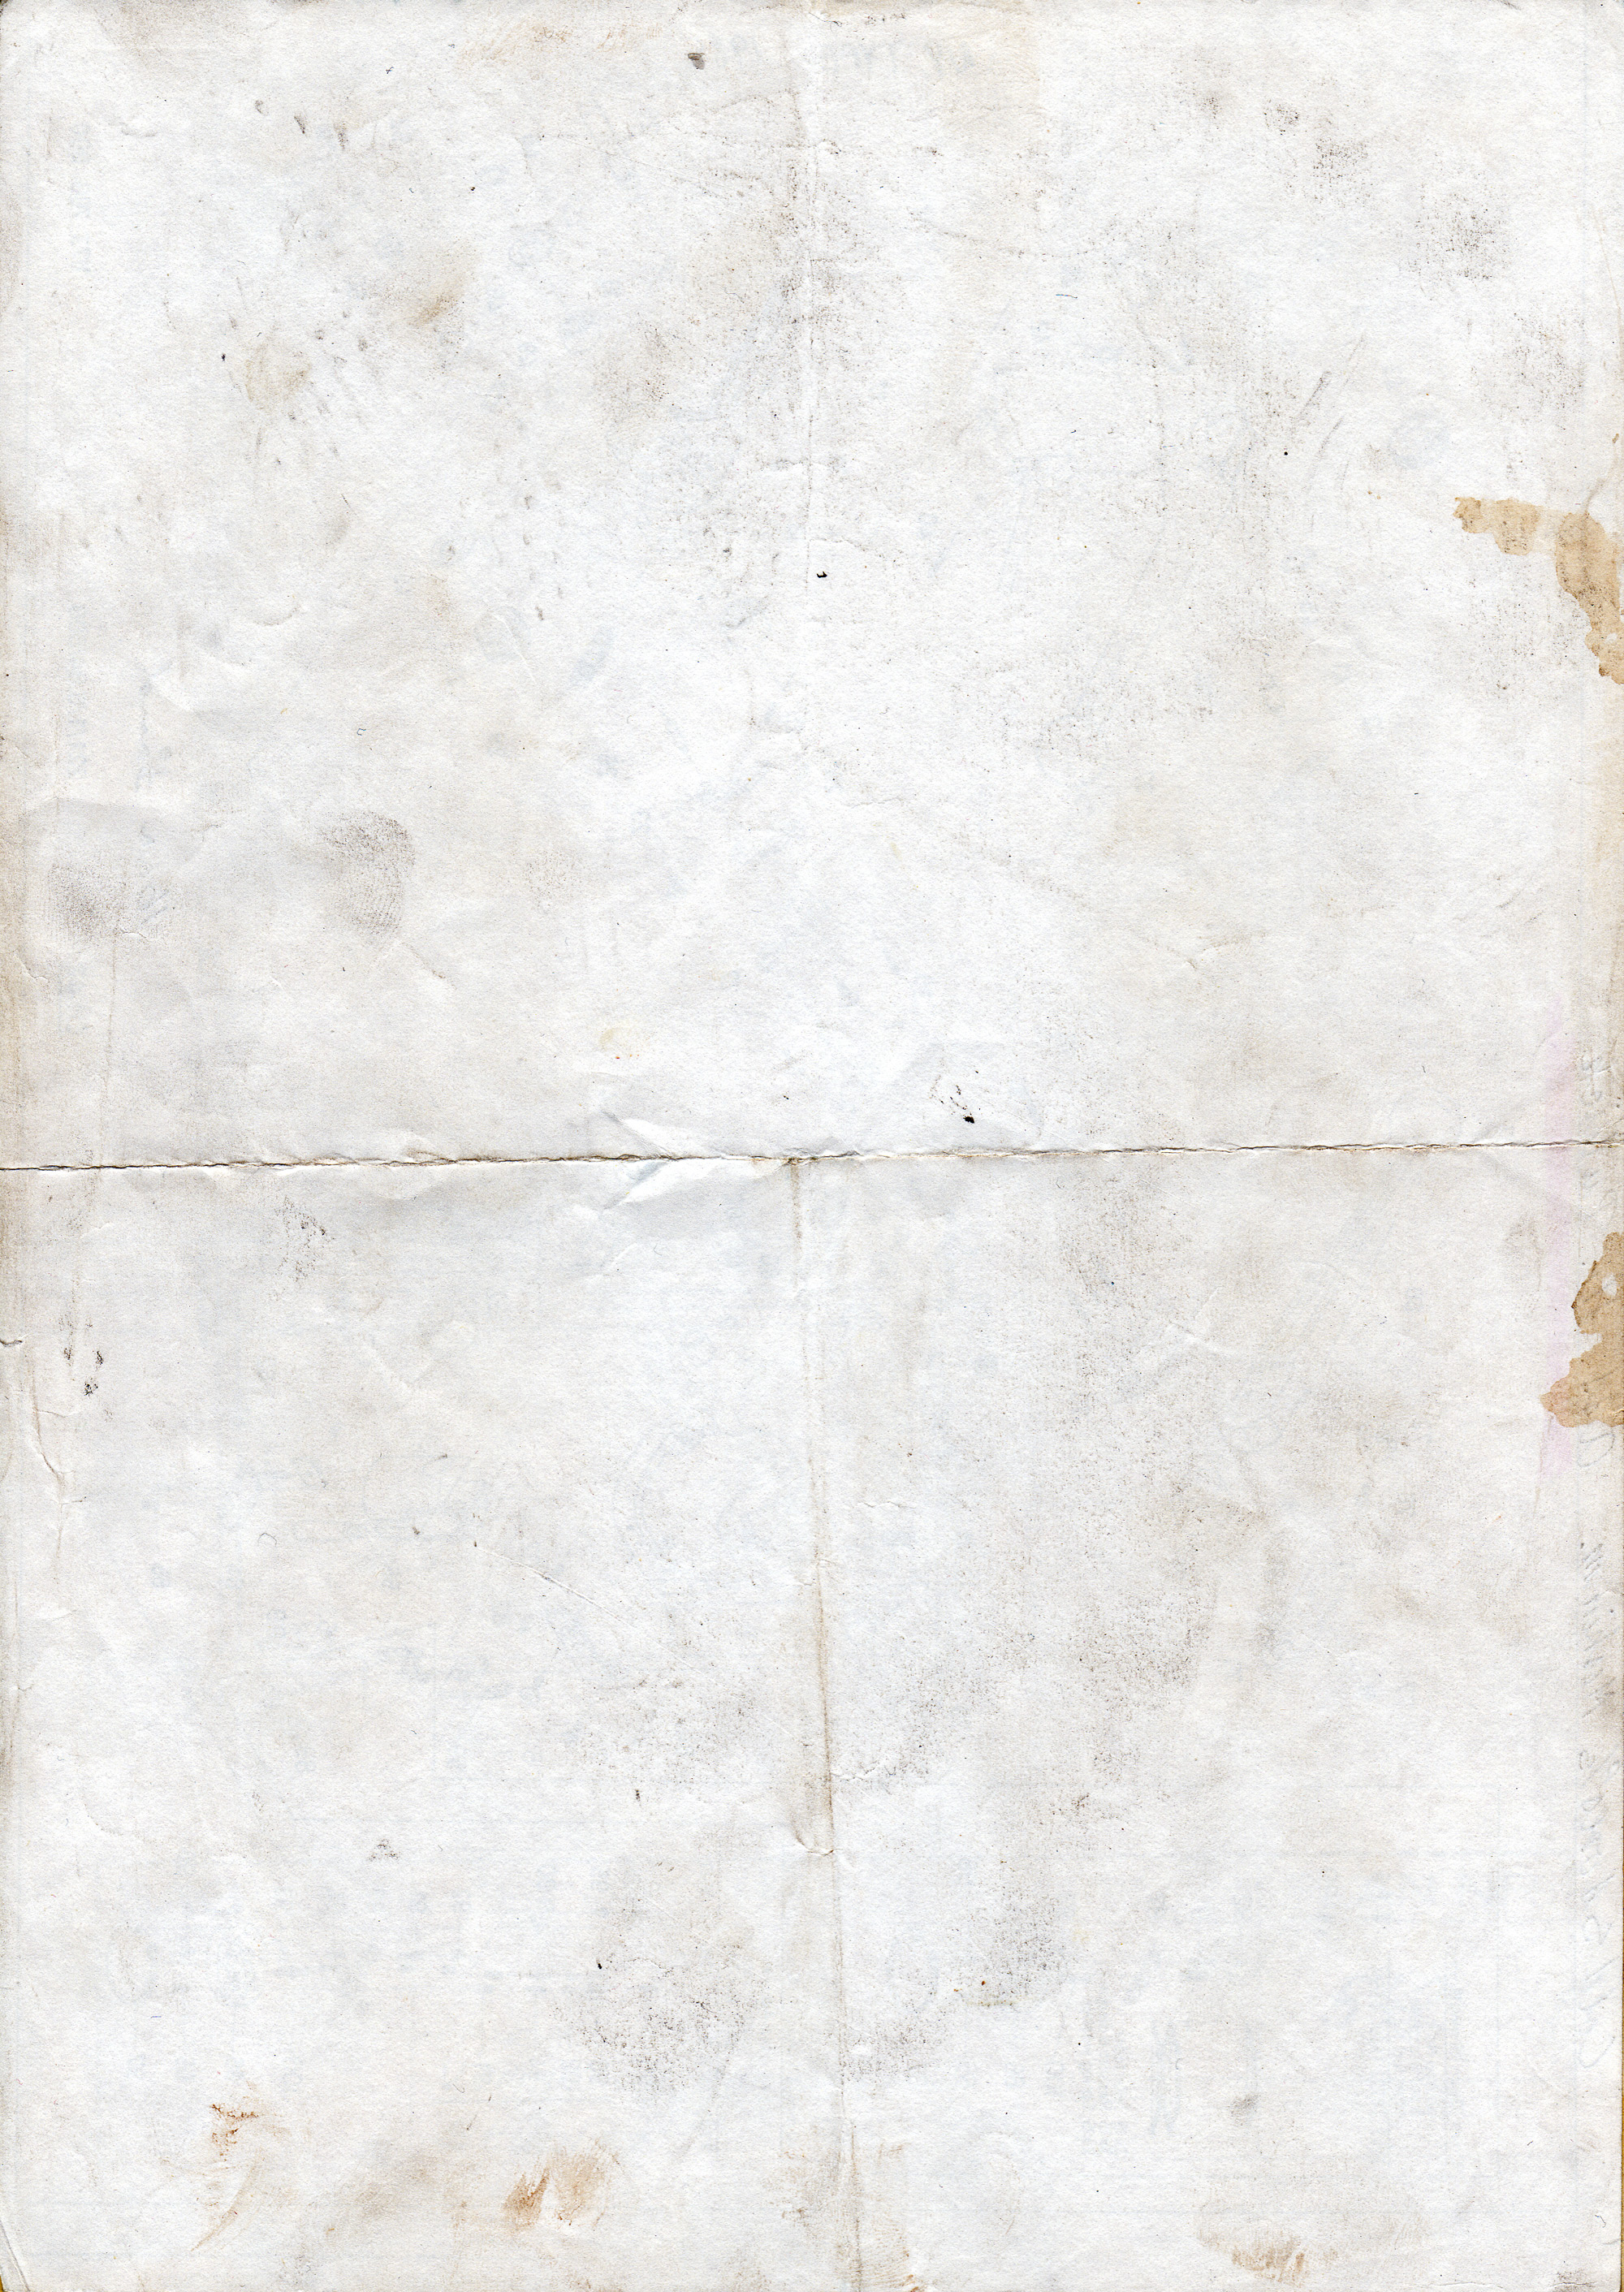 Grungy paper texture v.6 by bashcorpo on DeviantArt